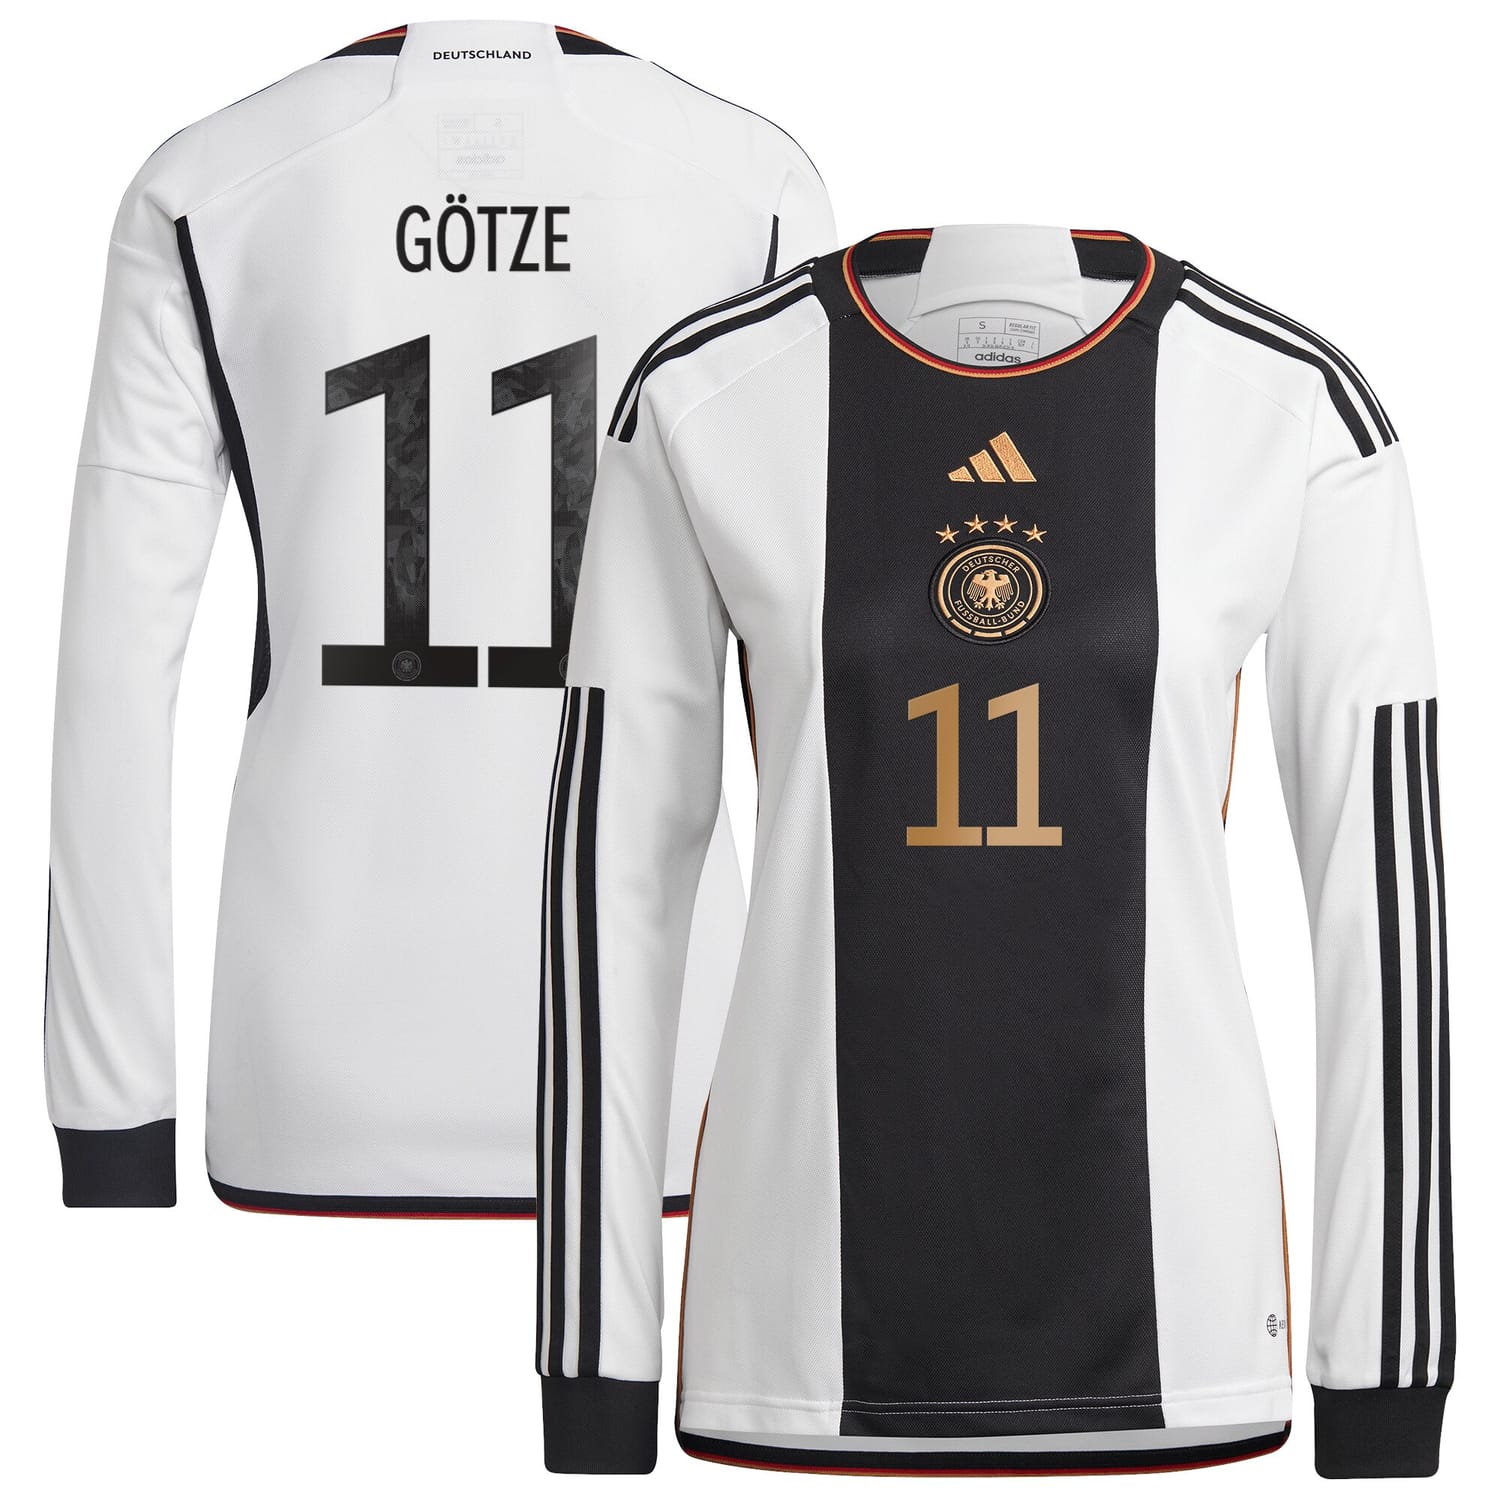 Germany National Team Home Jersey Shirt Long Sleeve 2022 player Mario Götze 11 printing for Women